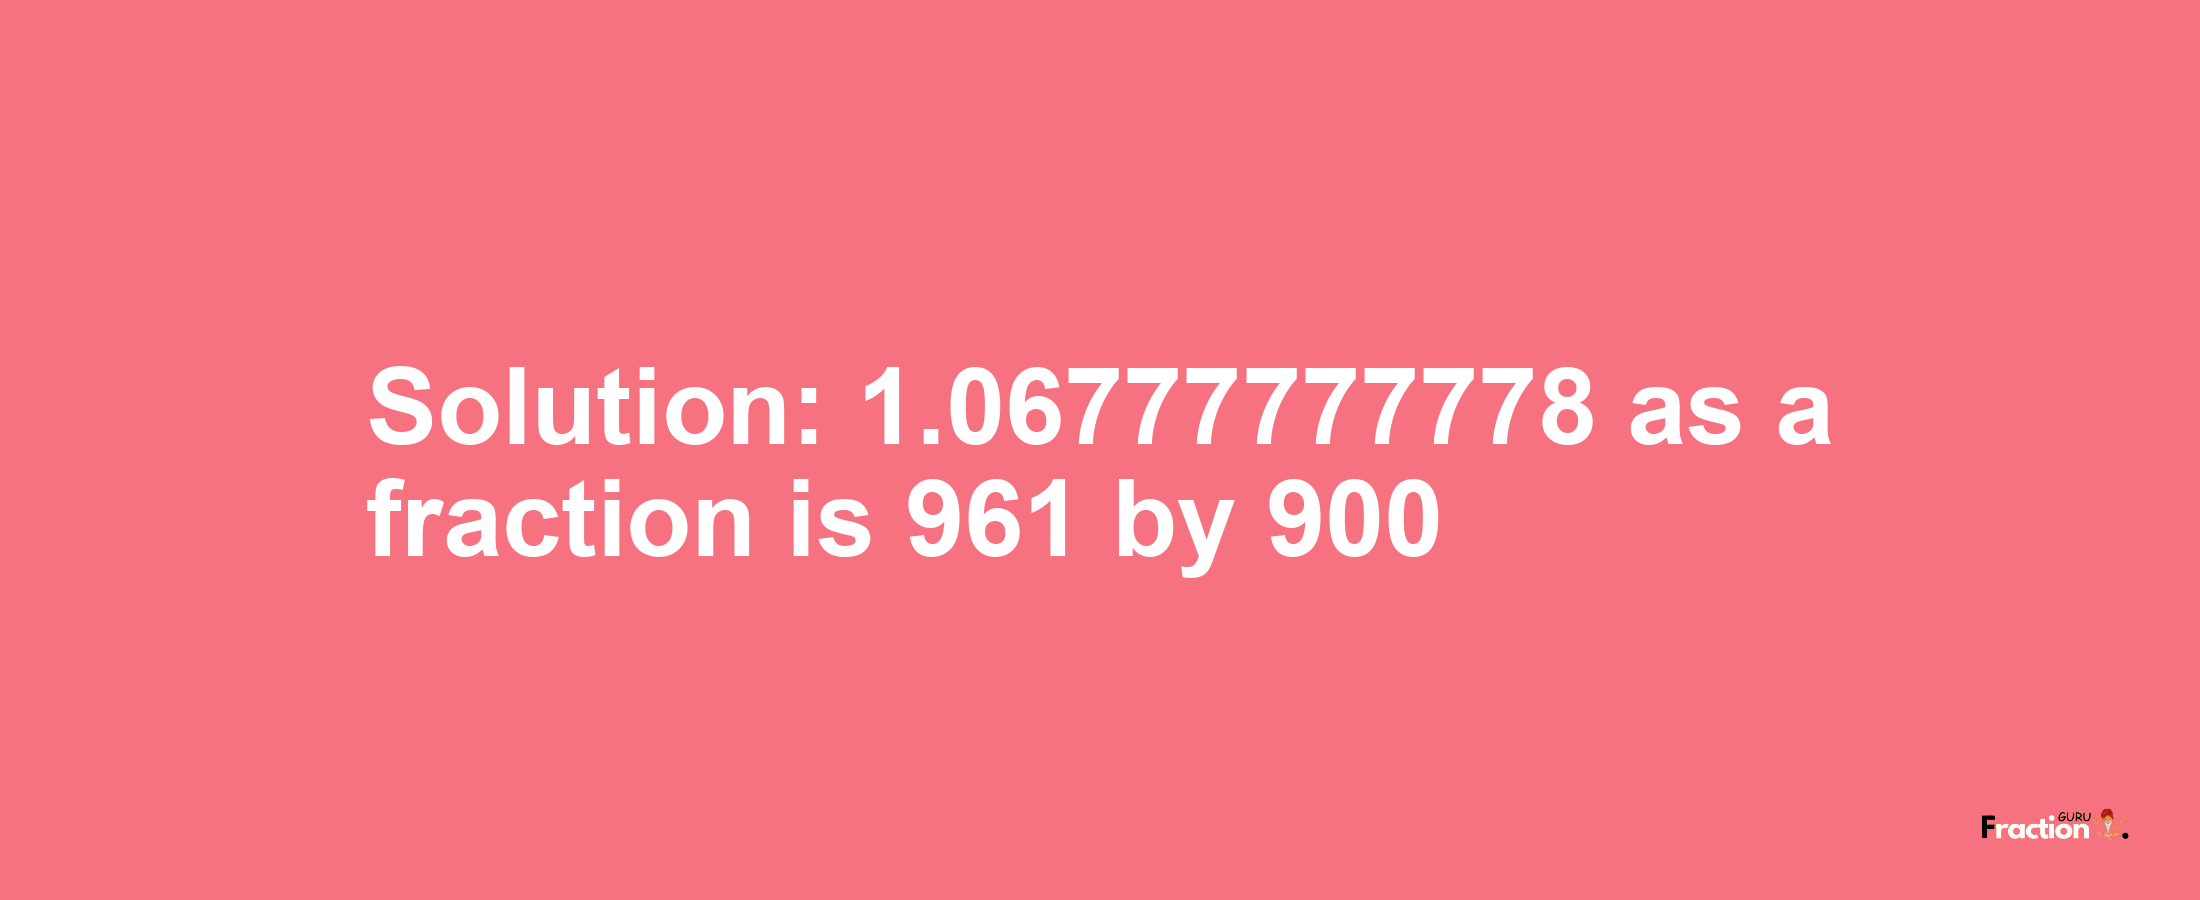 Solution:1.06777777778 as a fraction is 961/900